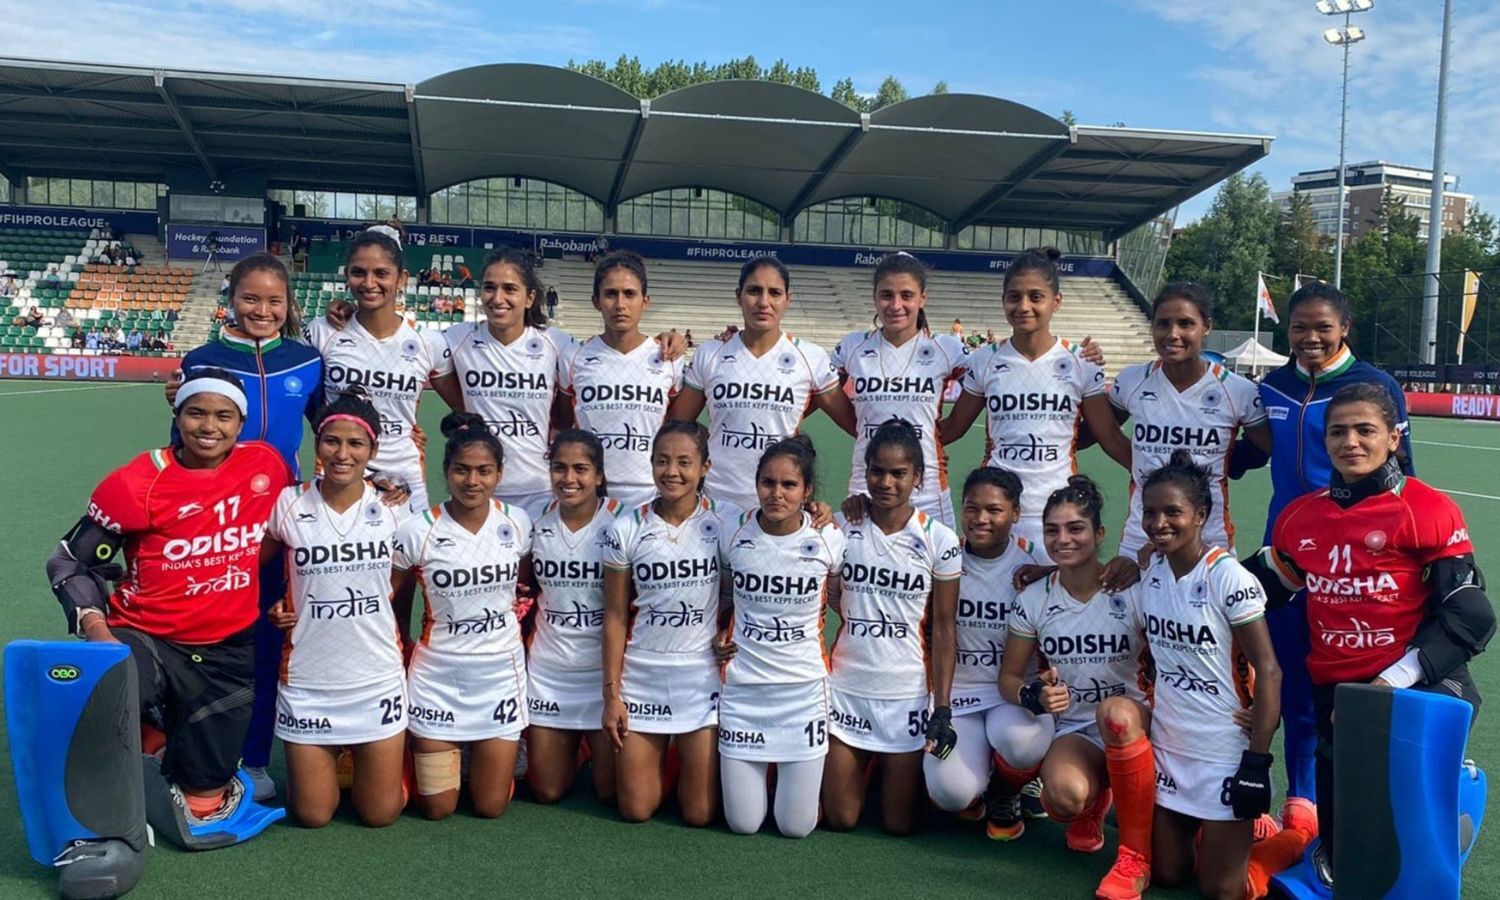 Moment of pride to wear India jersey at Asian Games: Hockey team